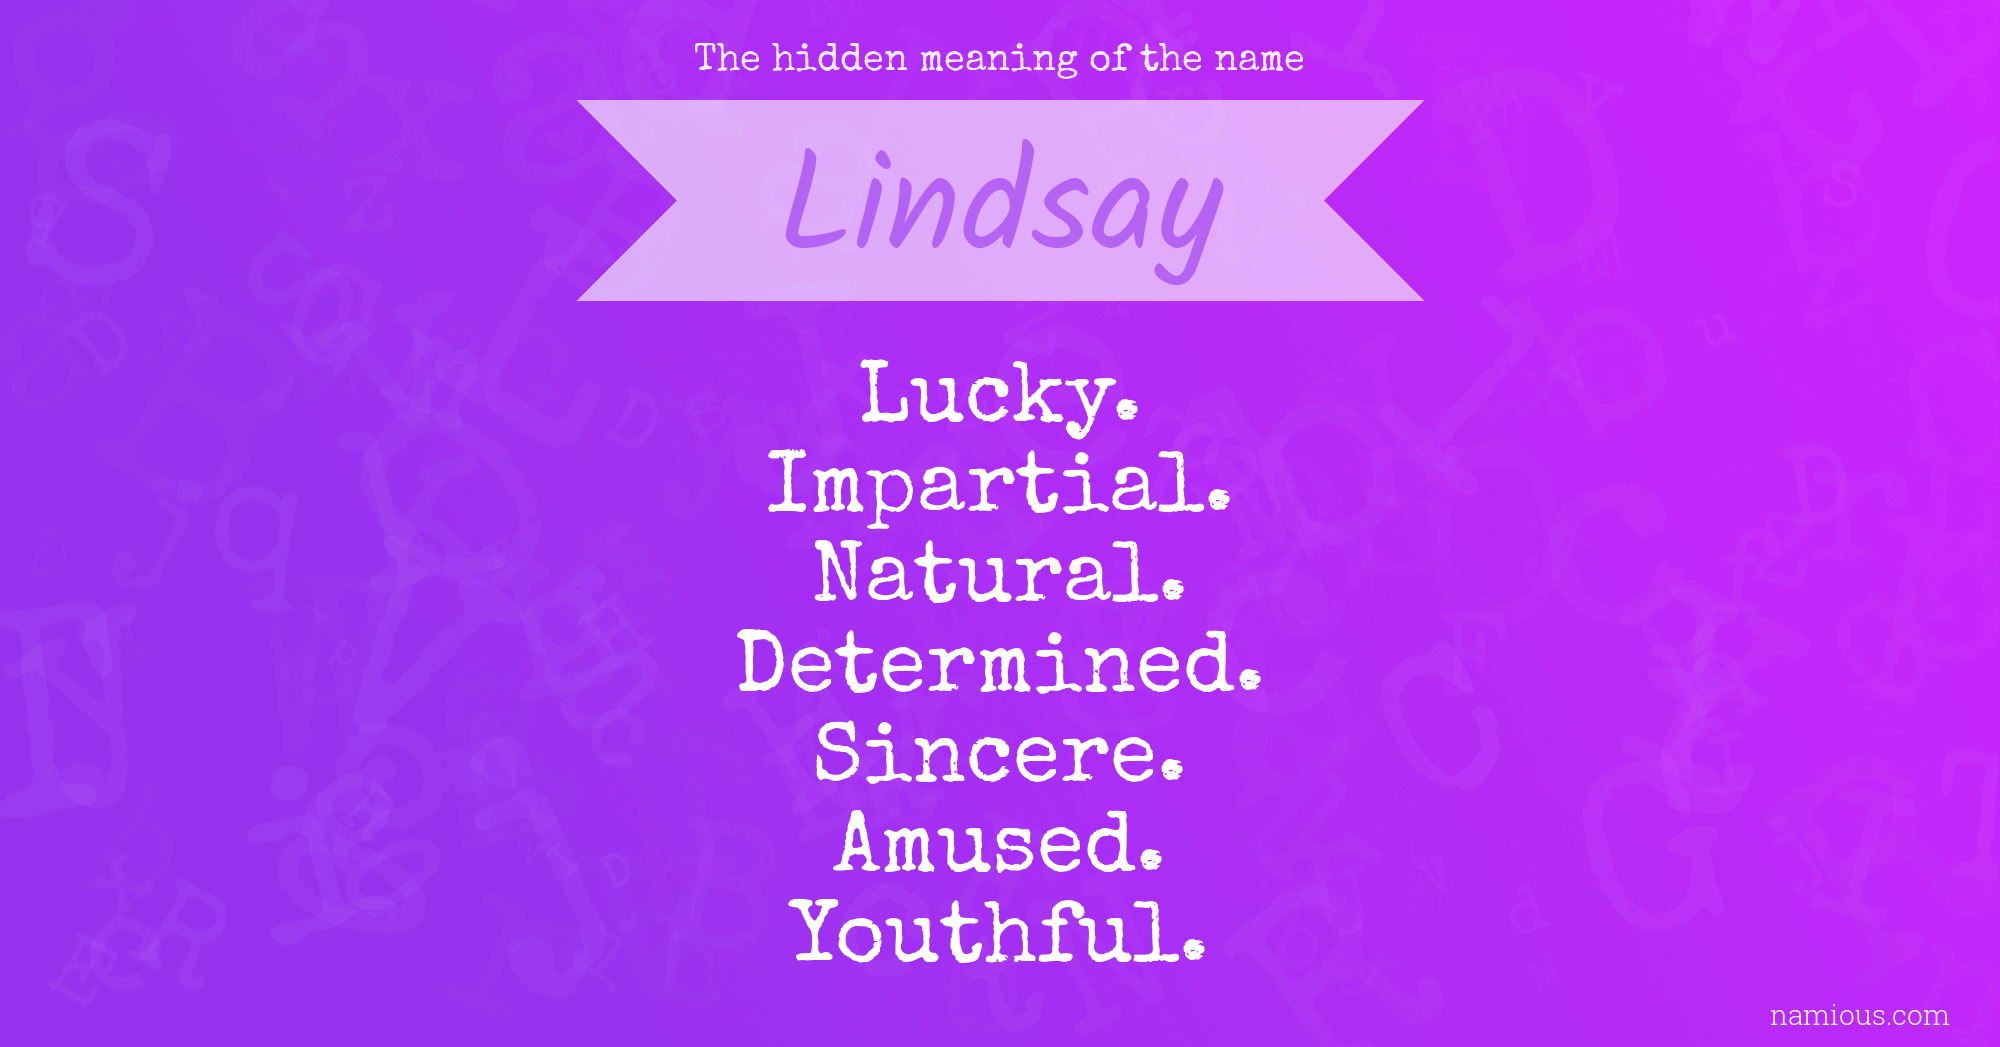 The hidden meaning of the name Lindsay